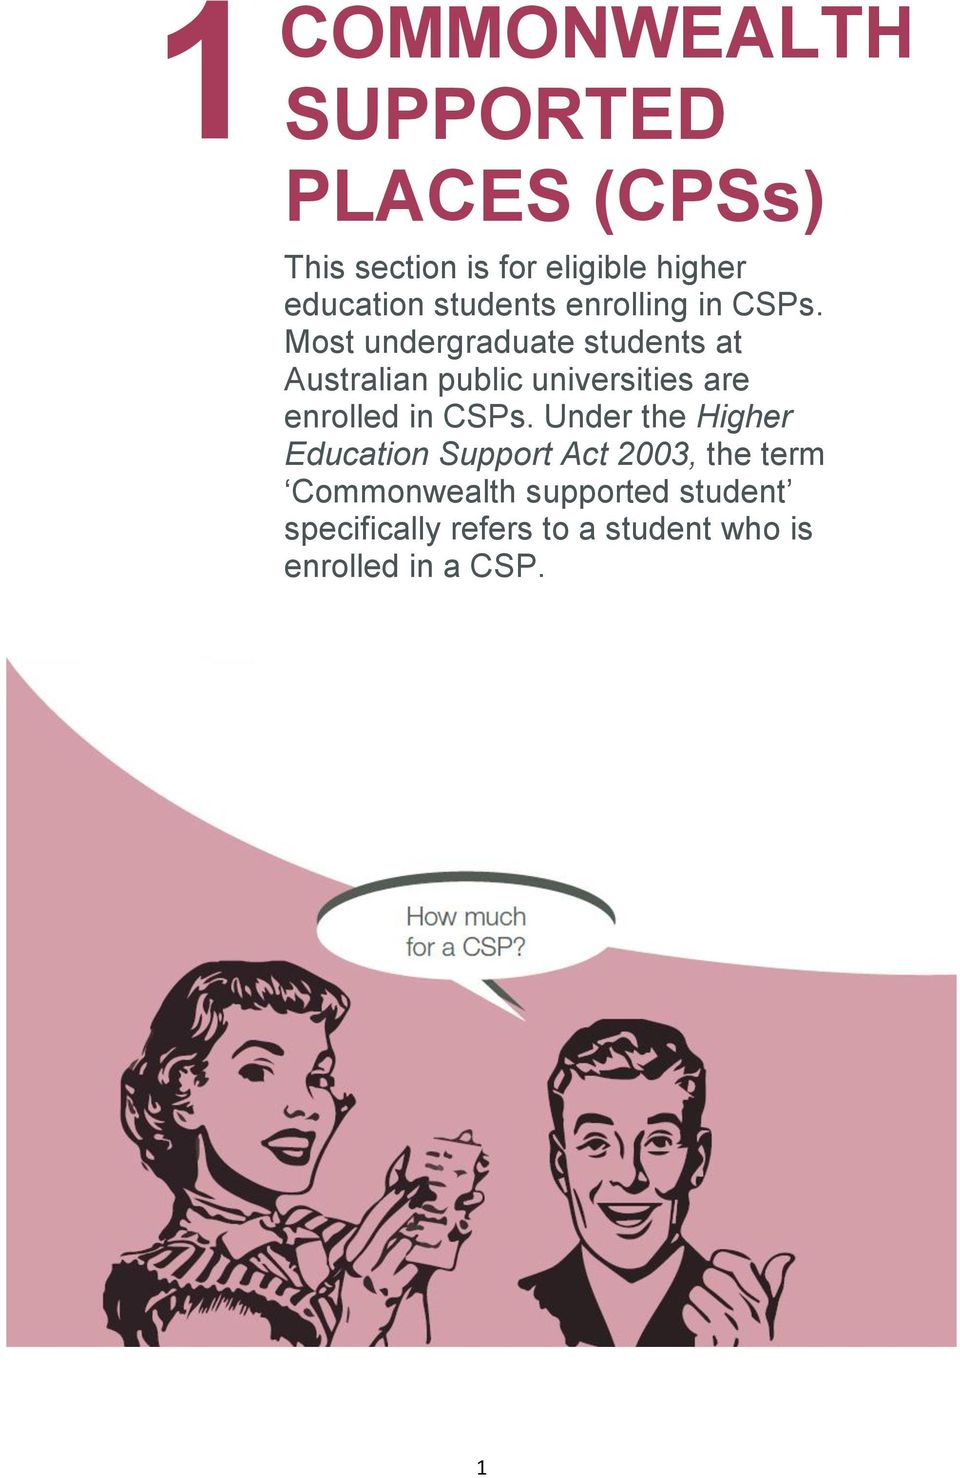 Most undergraduate students at Australian public universities are enrolled in CSPs.